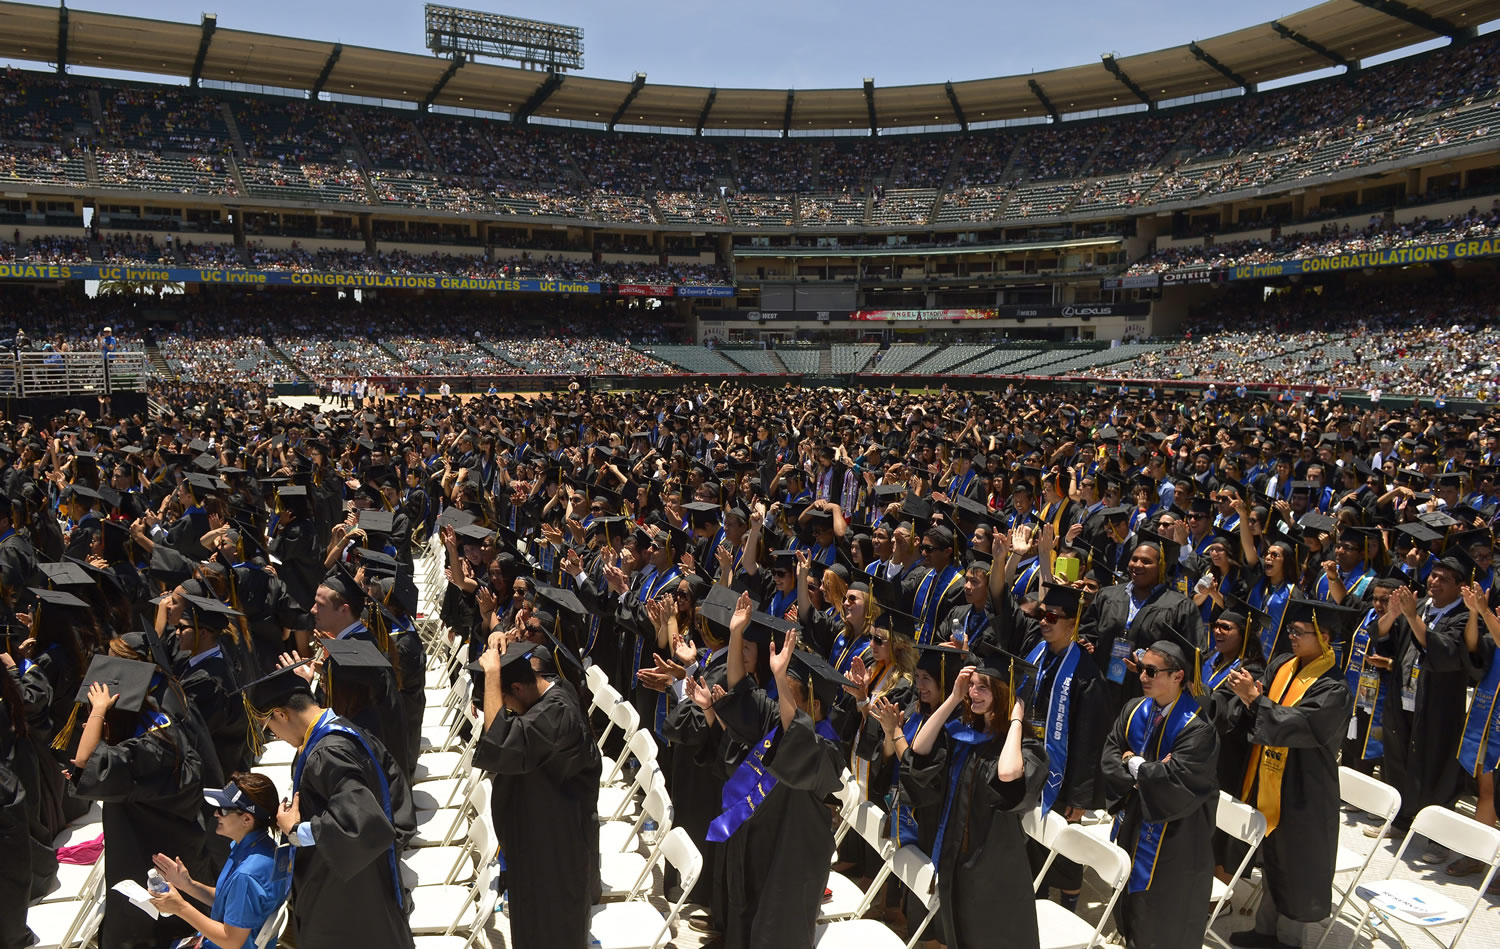 Students move their tassels from right to left following President Barack Obama's commencement address Saturday for the University of California, Irvine in Anaheim, Calif.